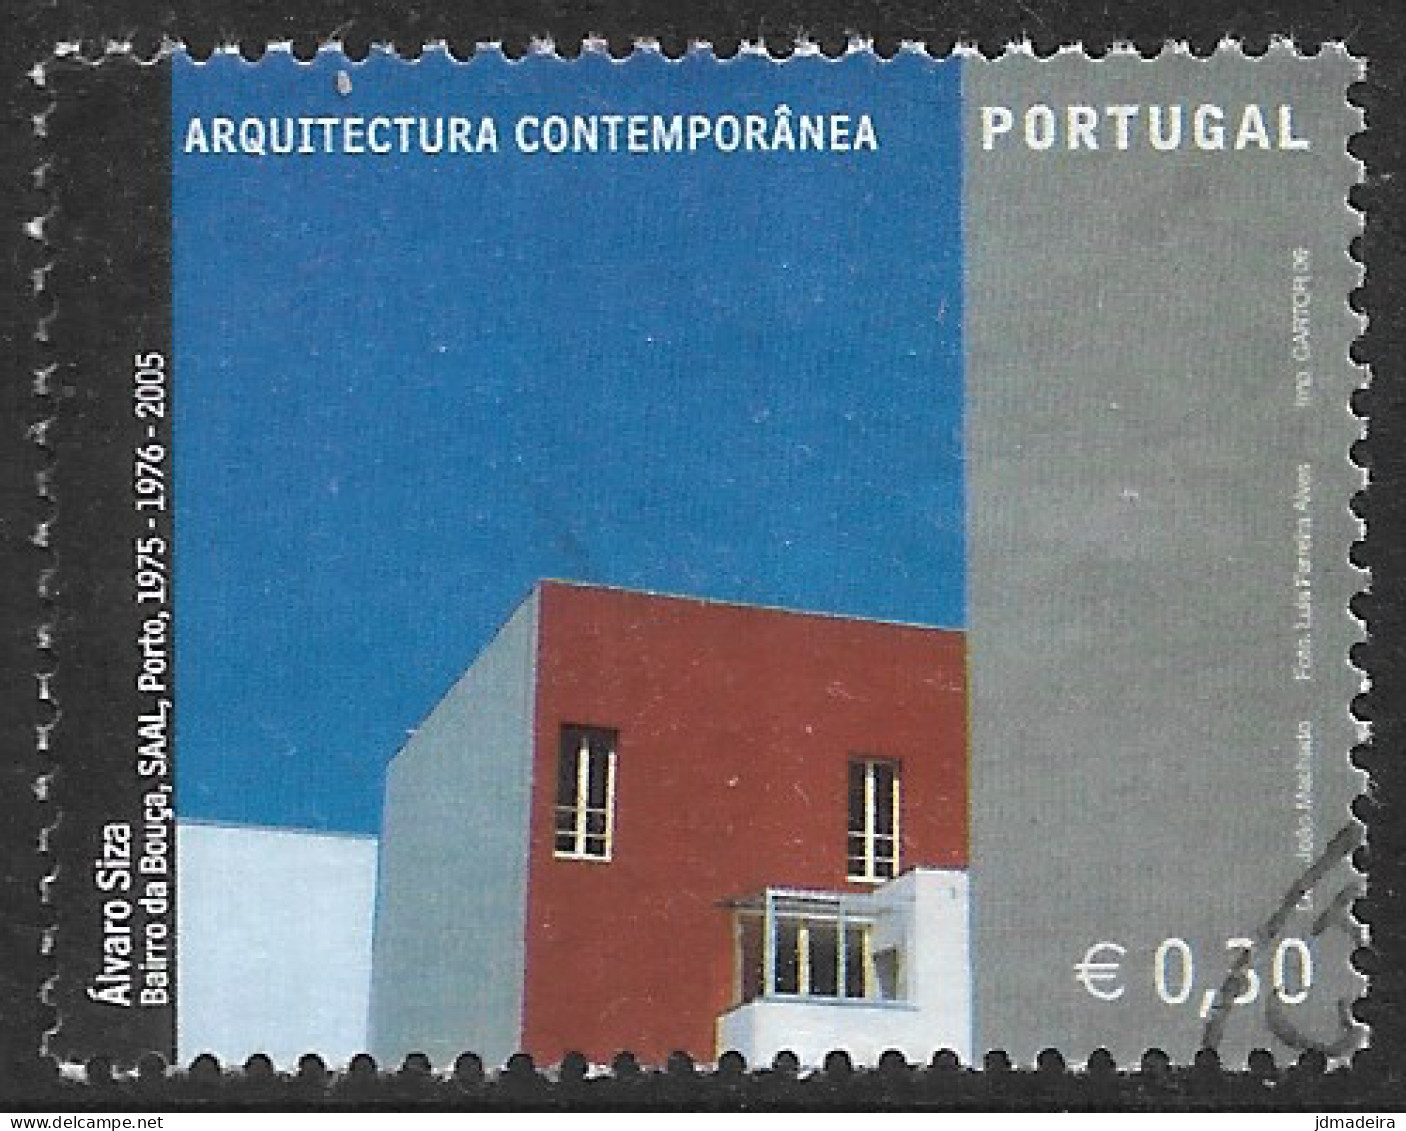 Portugal – 2006 Architecture 0,30 Used Stamp - Used Stamps